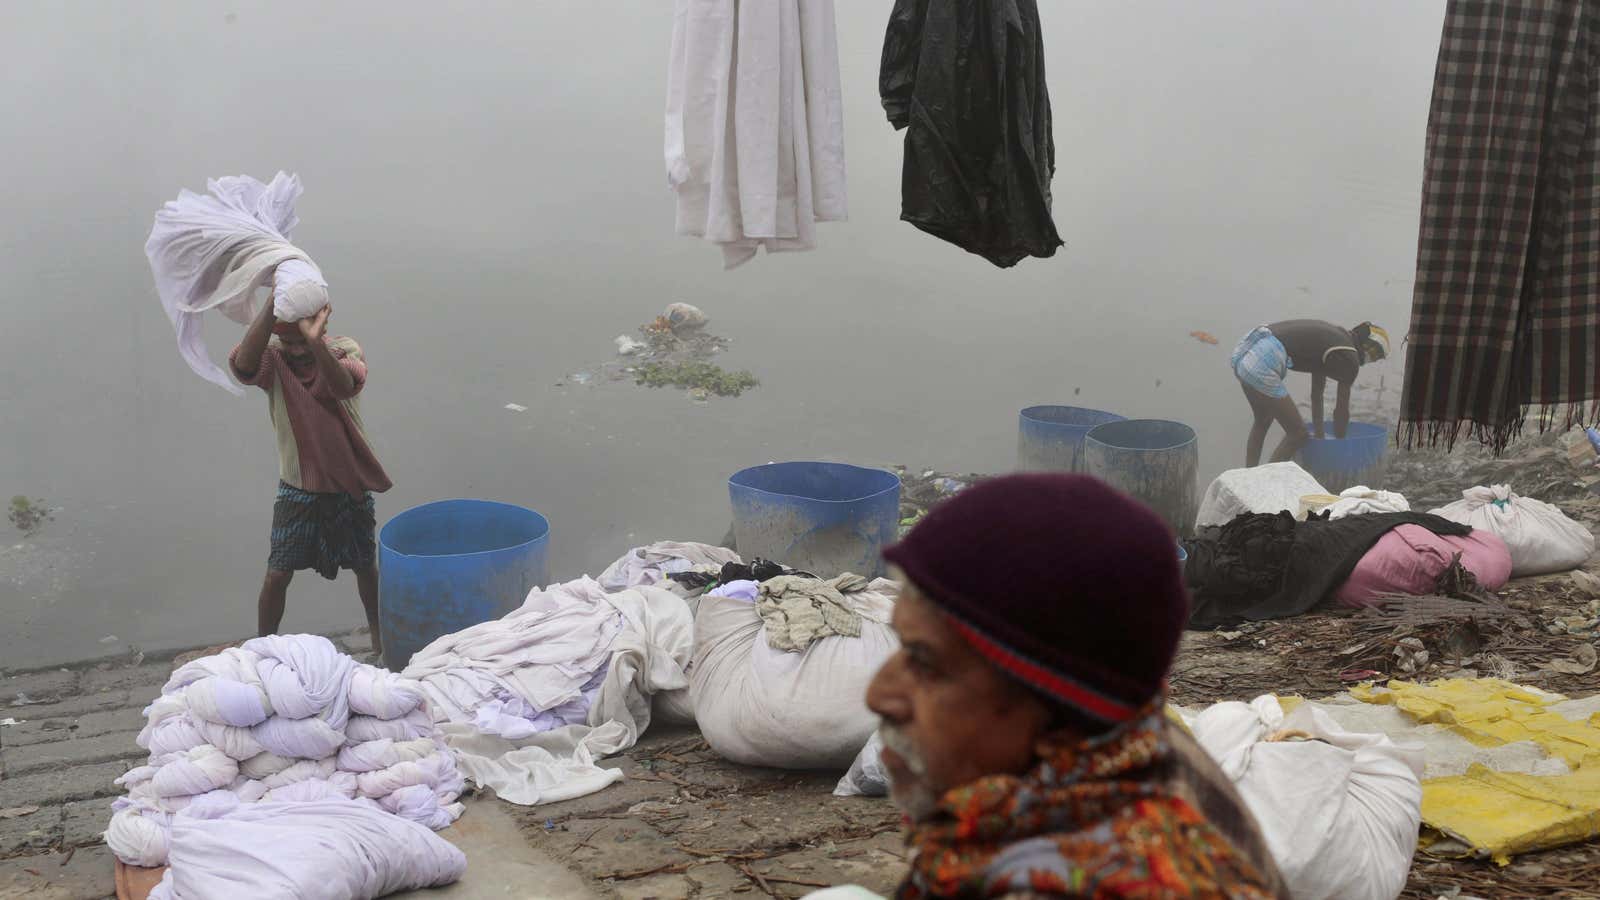 Bangladesh’s polluted Buriganga River, which receives wastewater dumped by textile manufacturers.